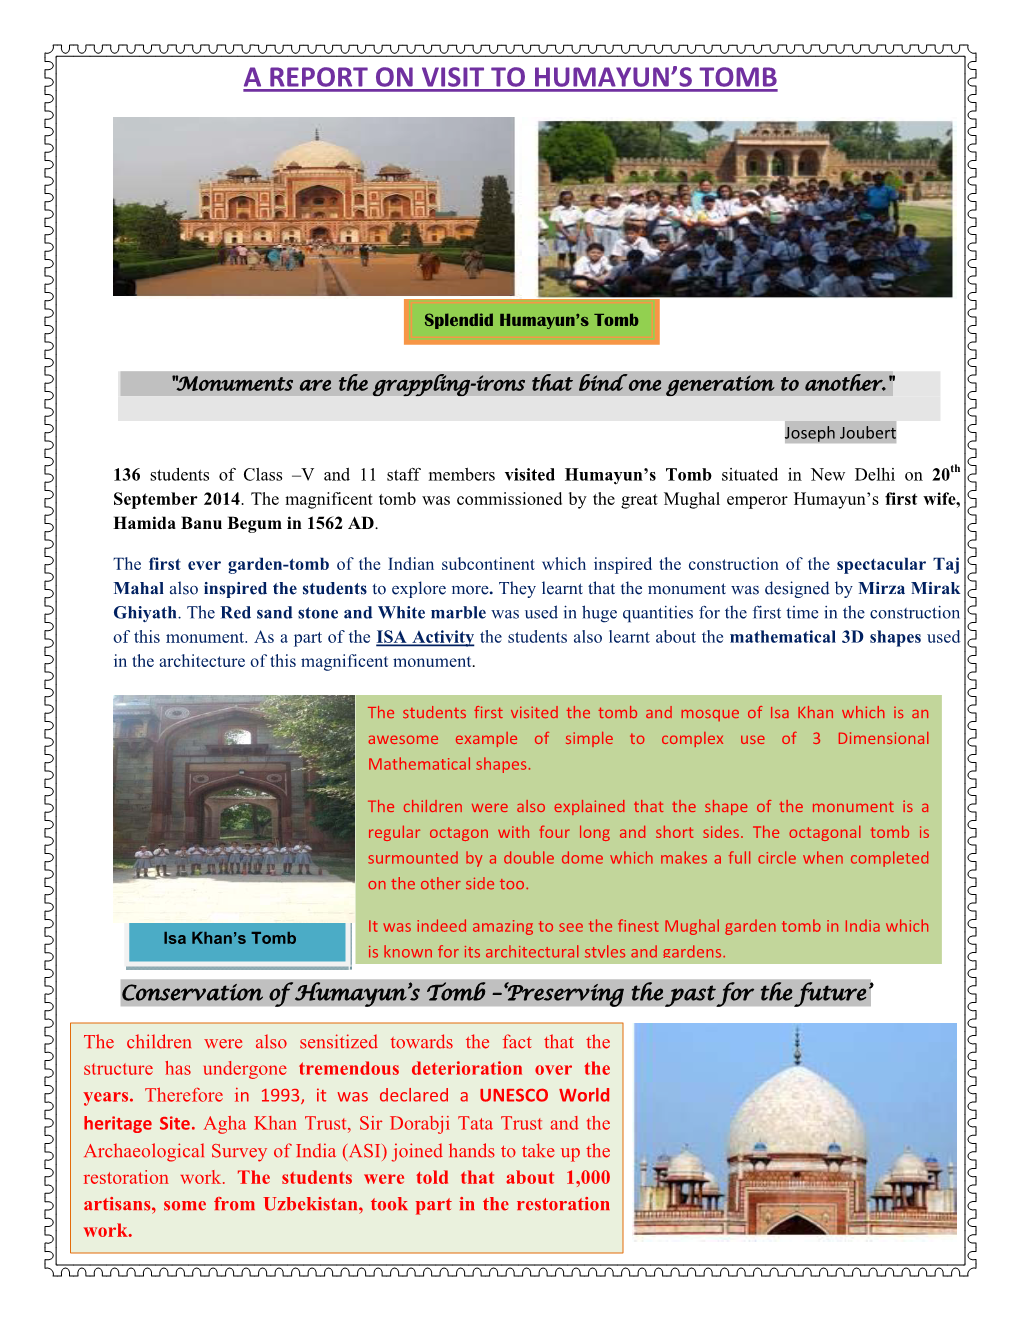 A Report on Visit to Humayun's Tomb